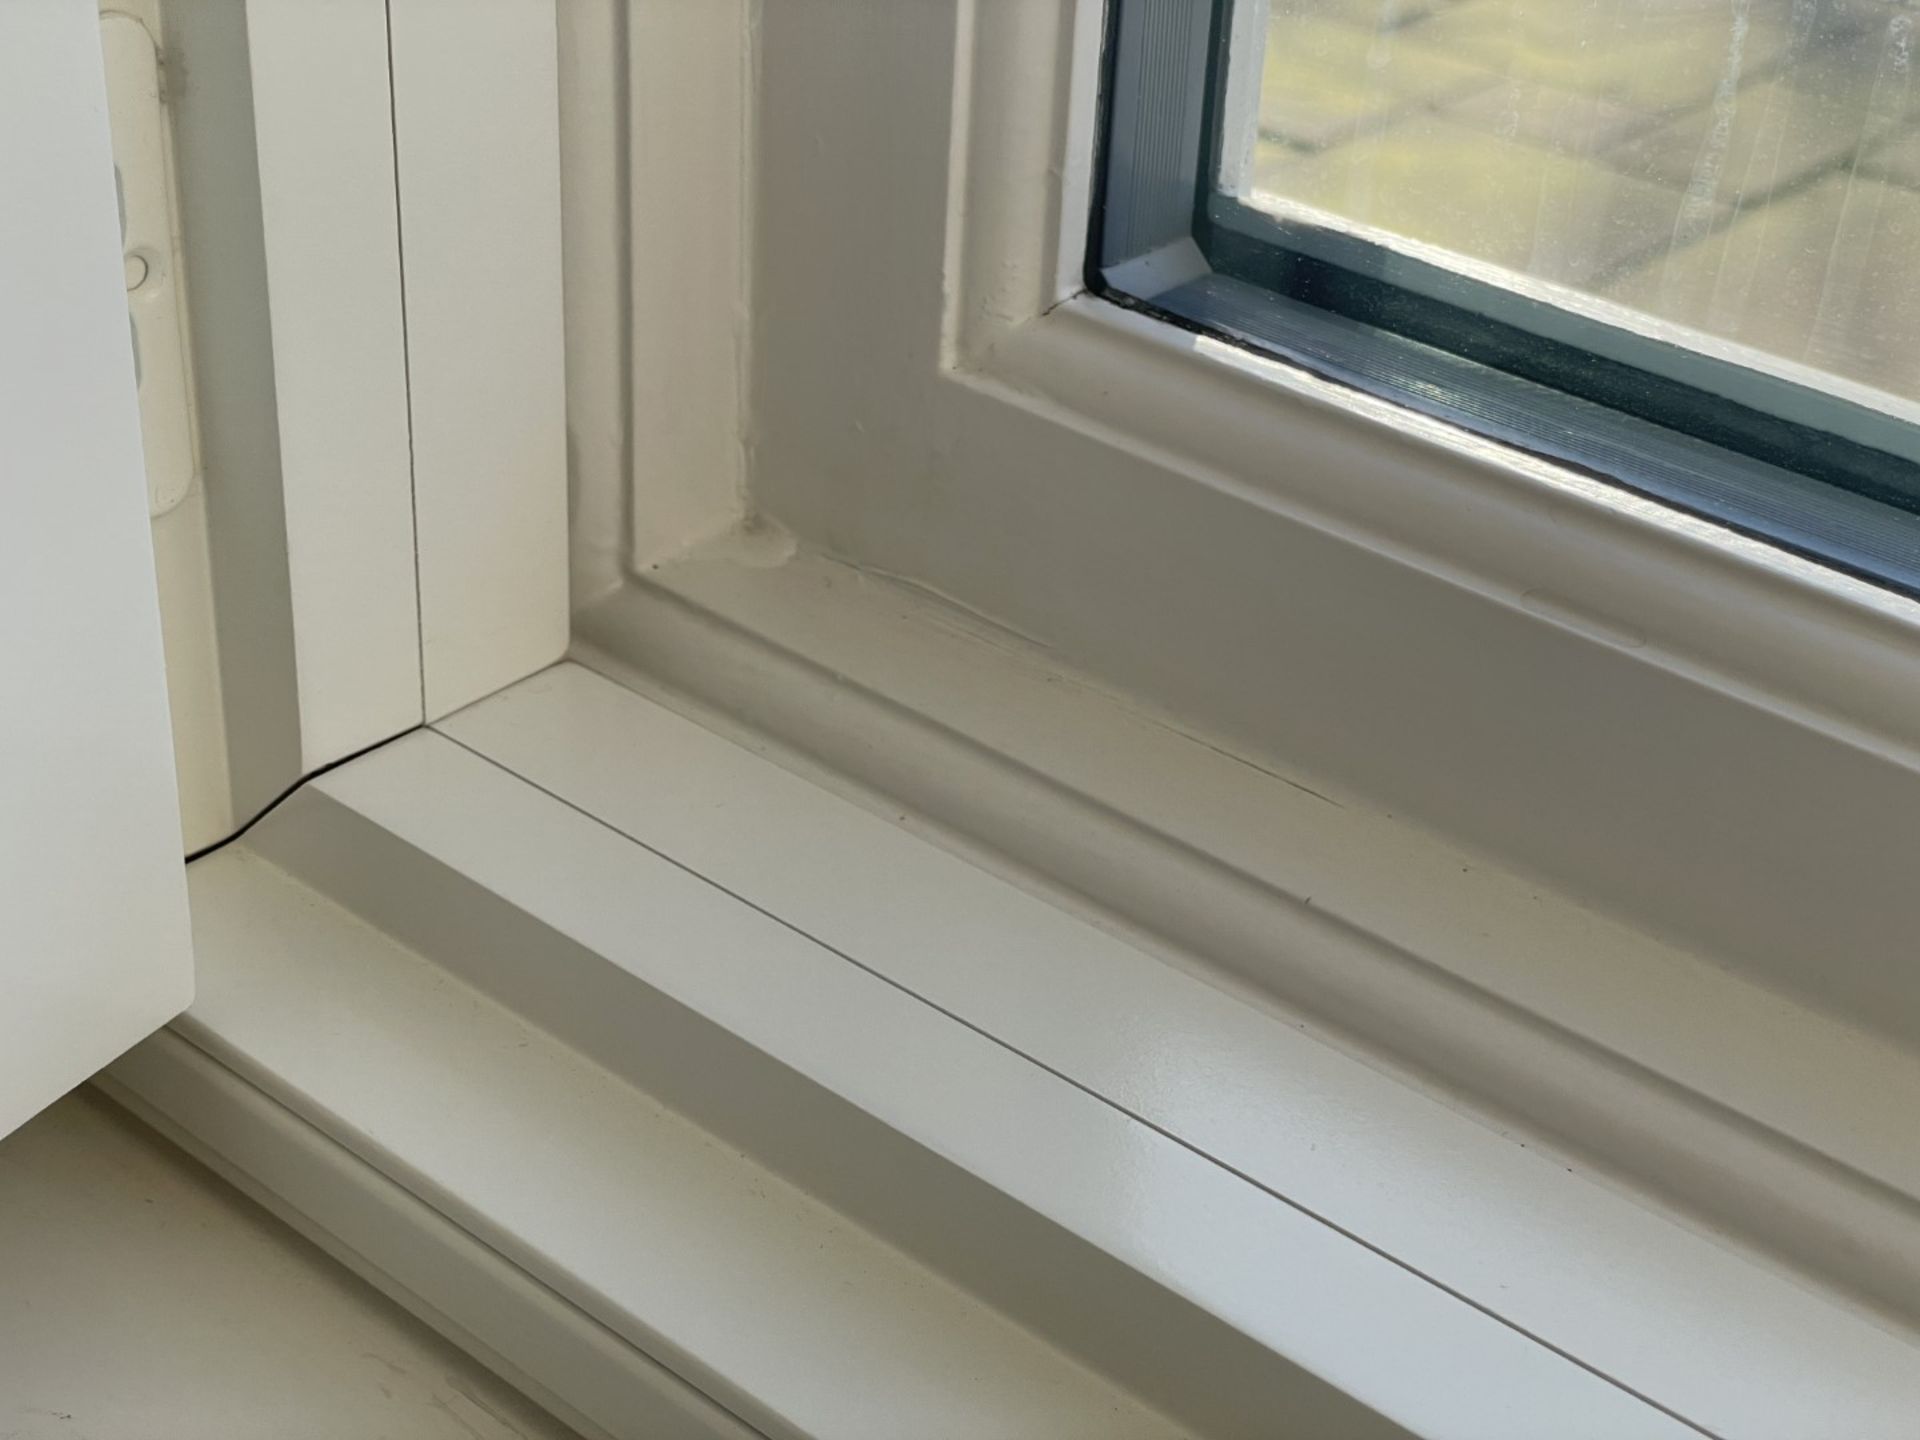 1 x Hardwood Timber Double Glazed Window Frames fitted with Shutter Blinds, In White - Ref: PAN107 - Image 6 of 15